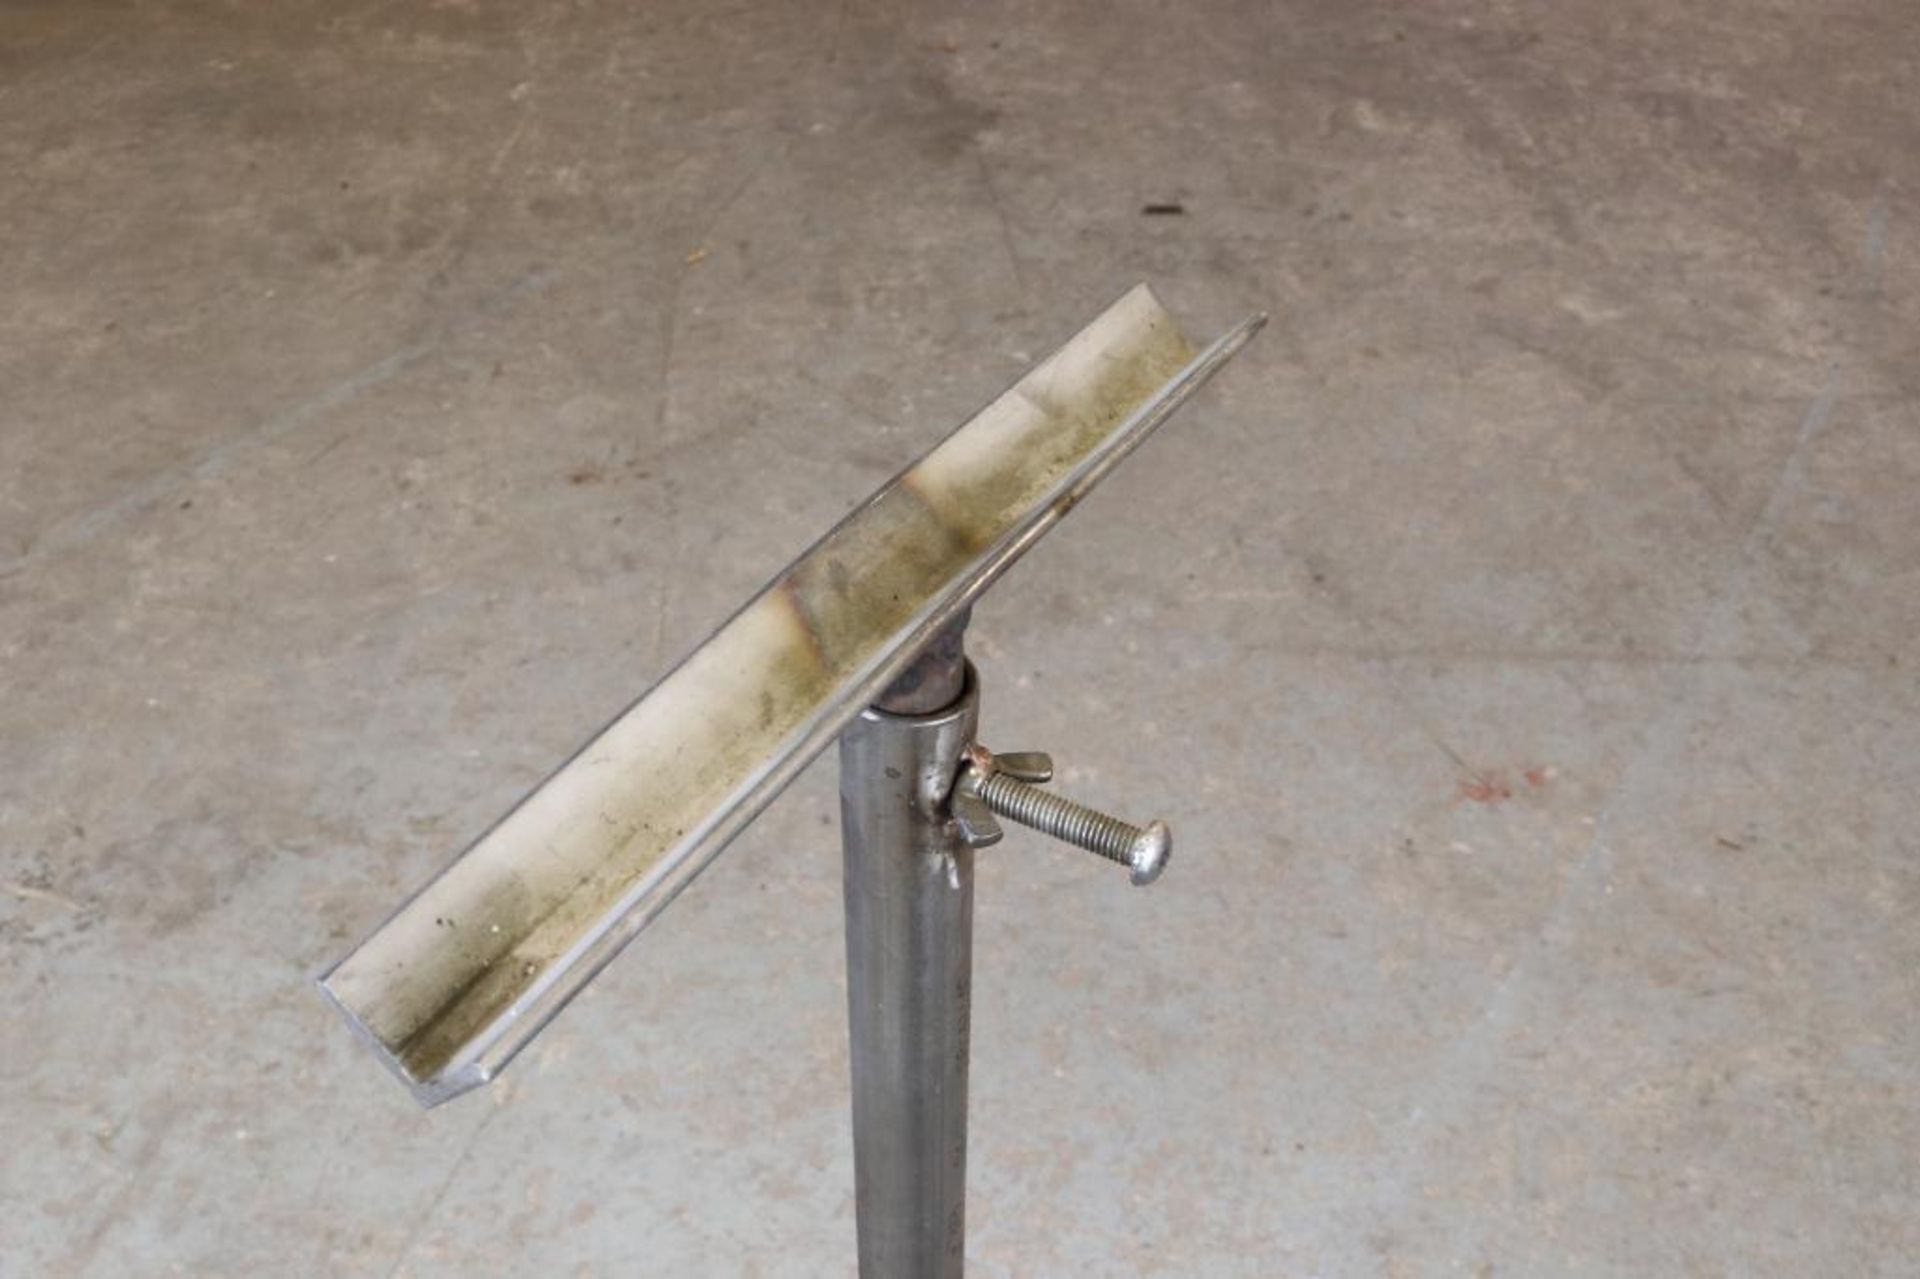 Rolling Metal Welding Table with Bottle Rack and Pipe Stand - Image 7 of 8